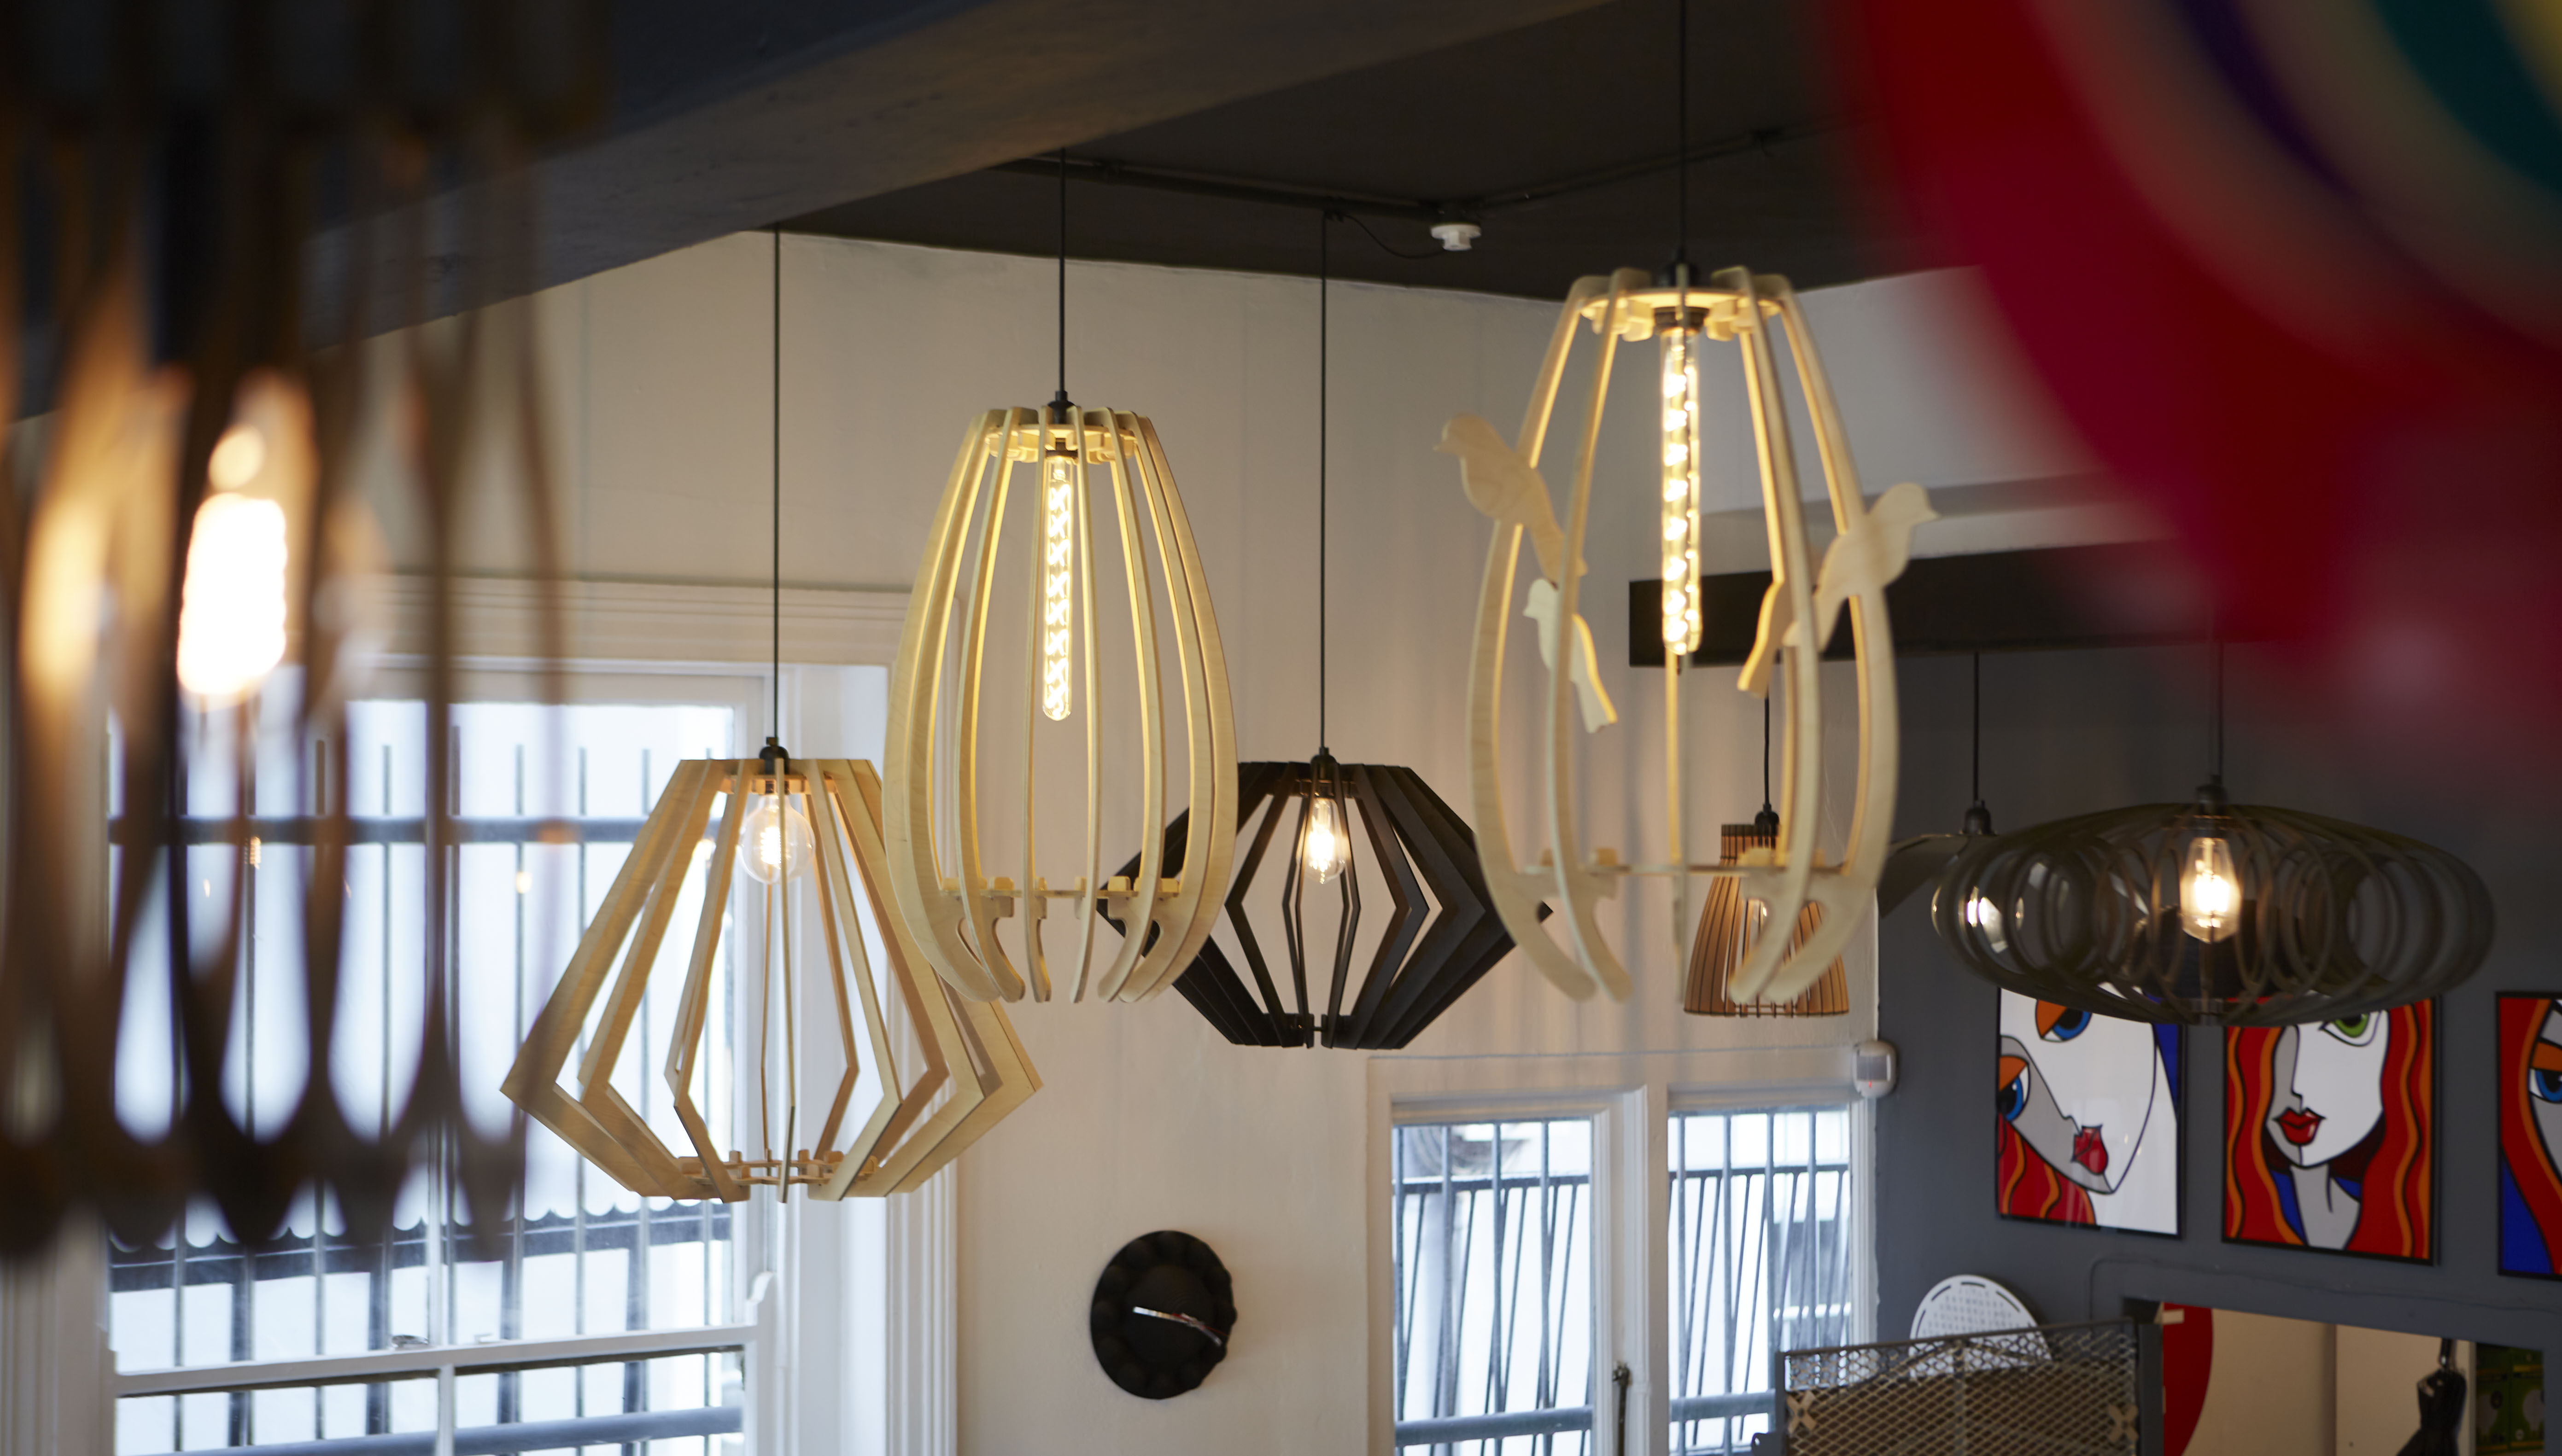 Our beautiful pendant lights.